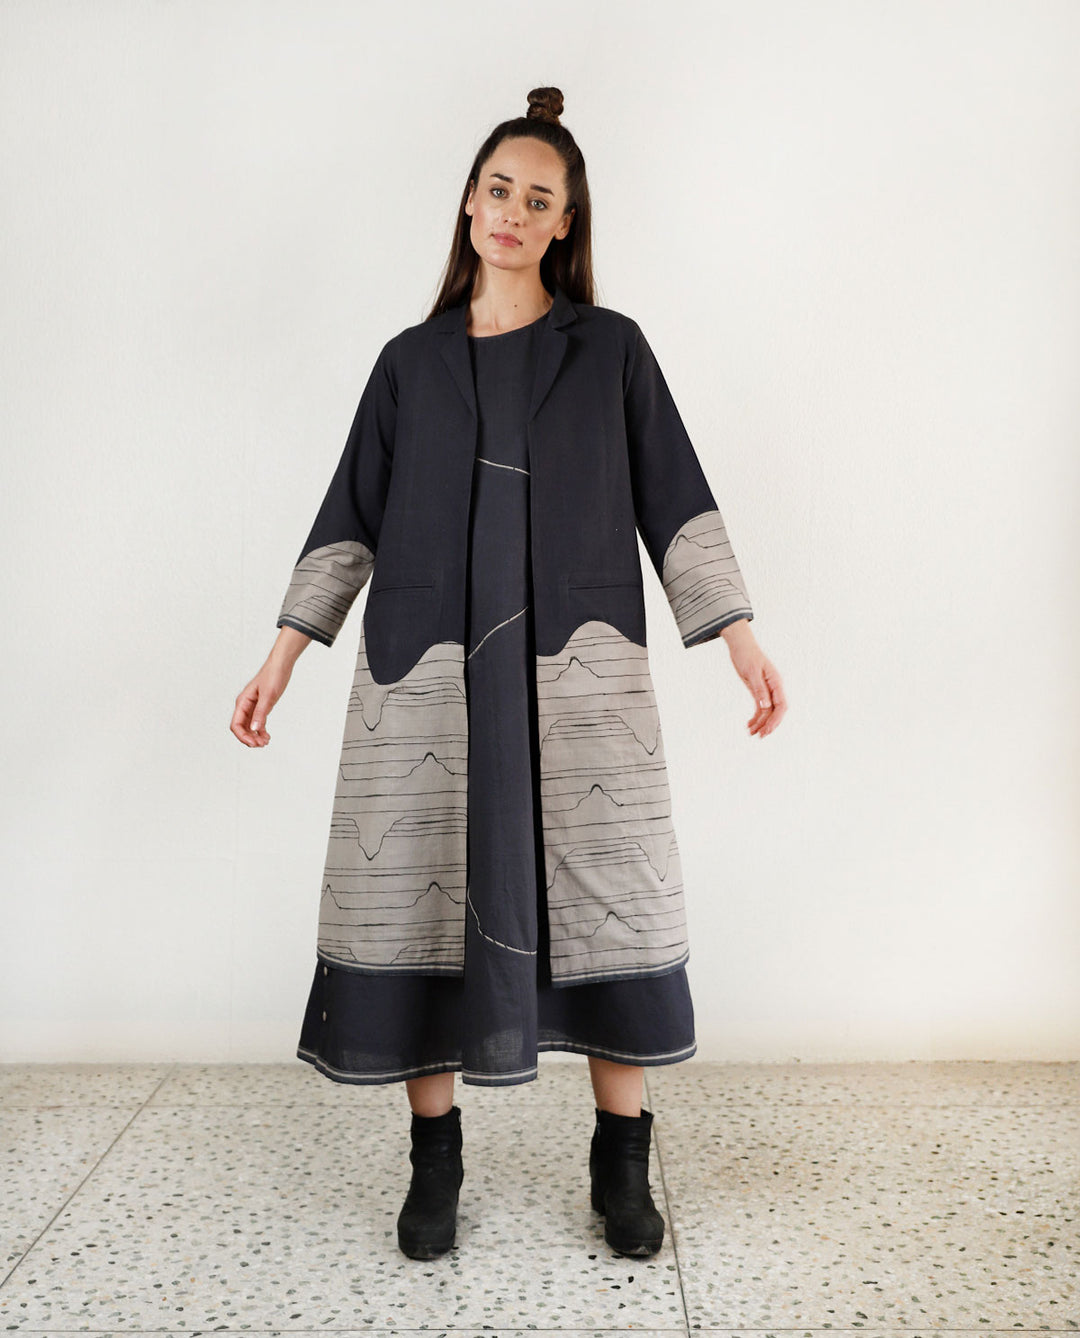 RELAXED WAVES JACKET MAXI CO-ORD